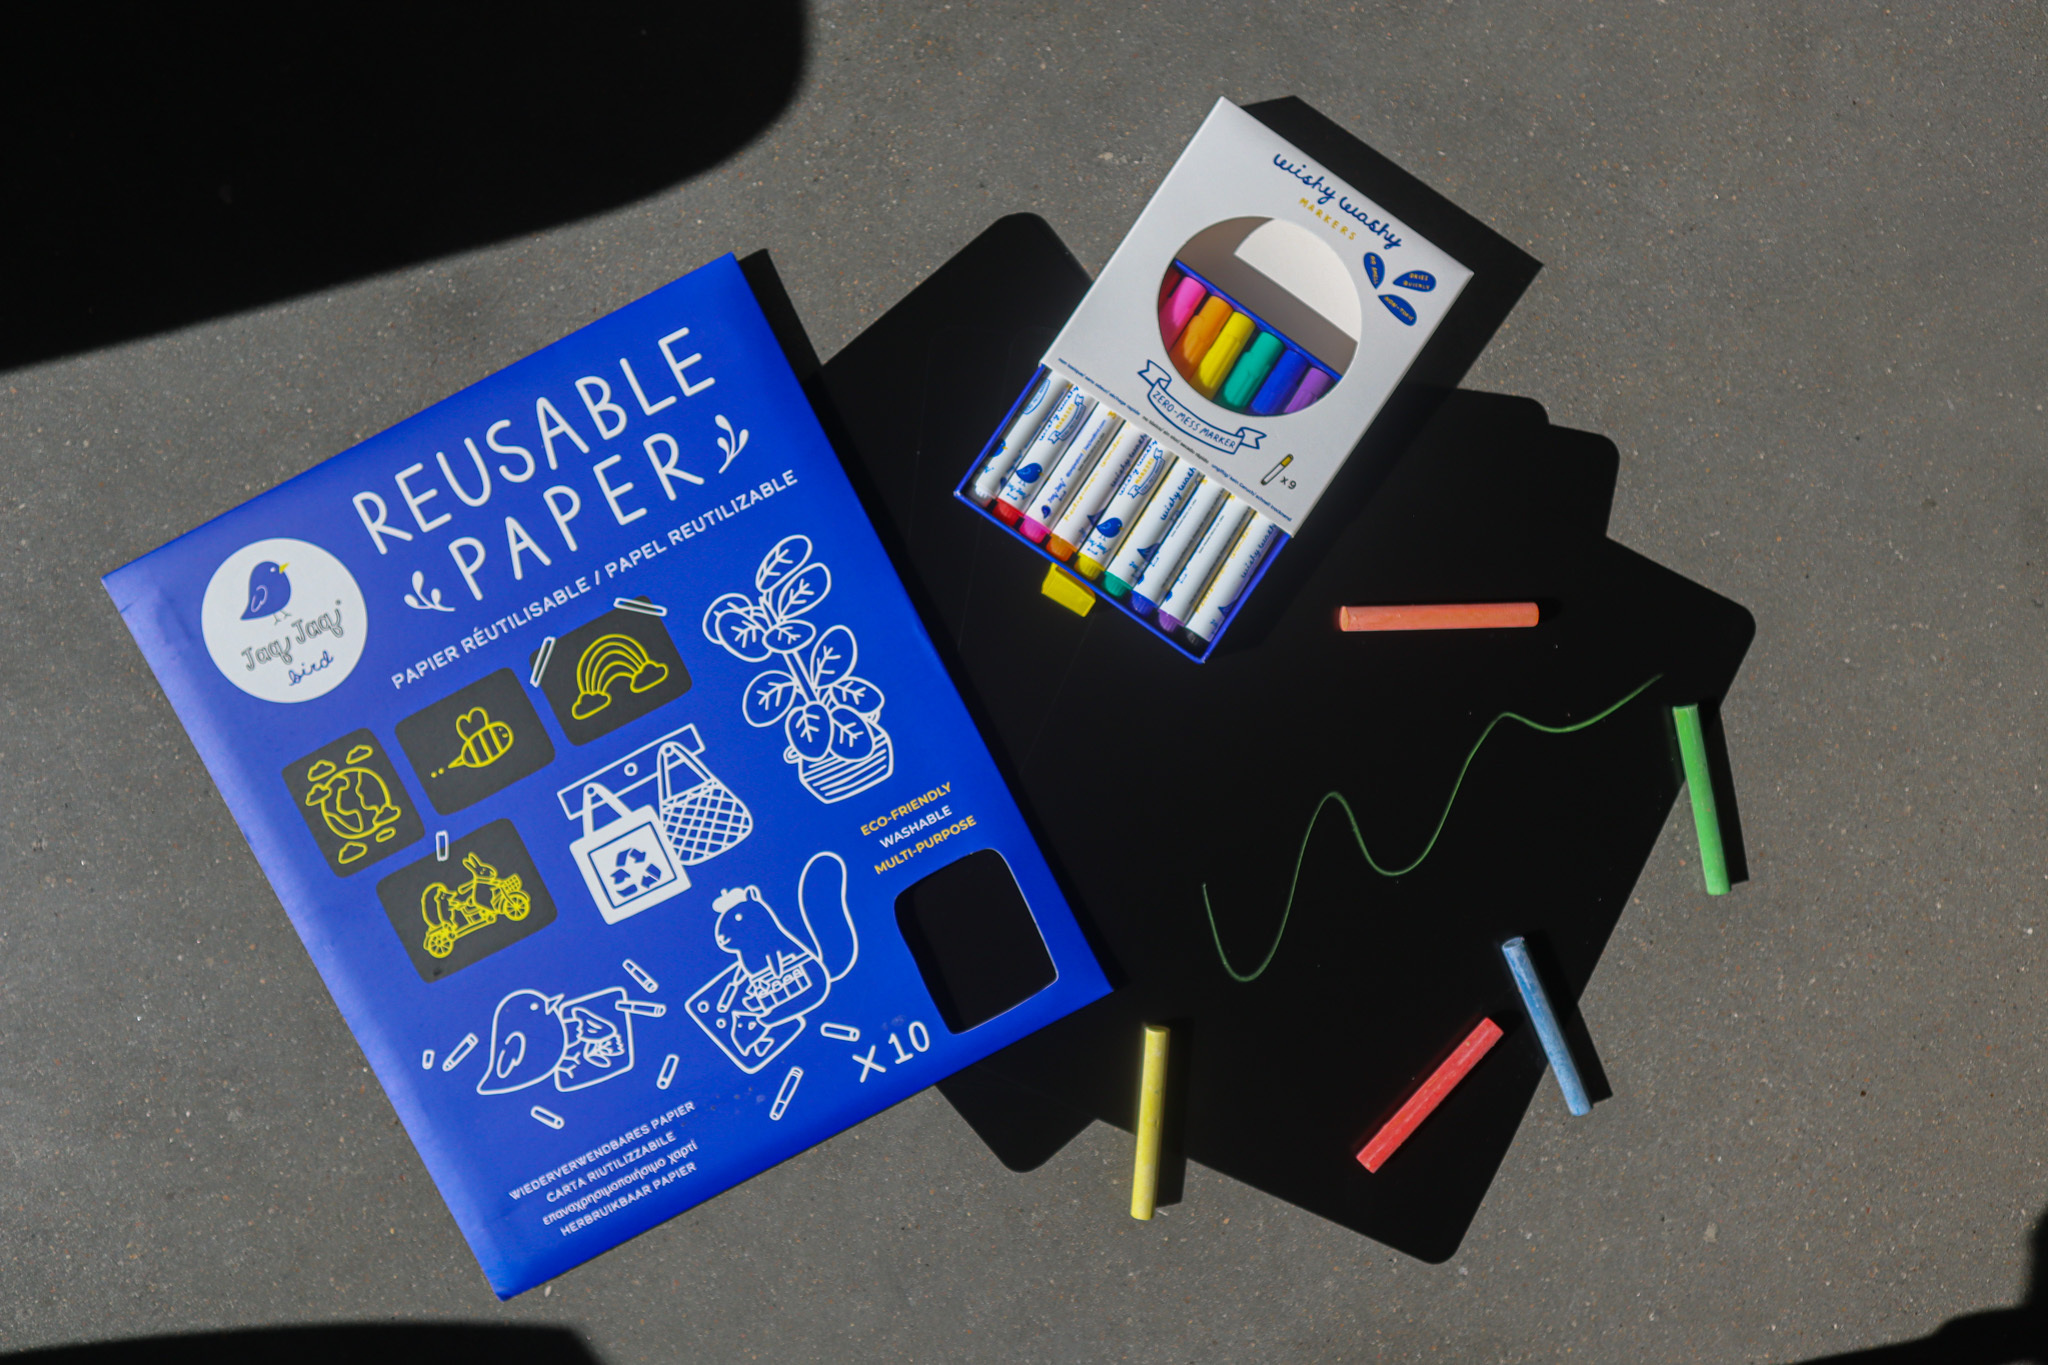 Art-making tools lay on a cement surface. On the left is a blue envelope with yellow and white doodles on the front and text that reads REUSABLE PAPER. To the right is black sheets, a box of markers and scattered crayon-like coloring sticks.